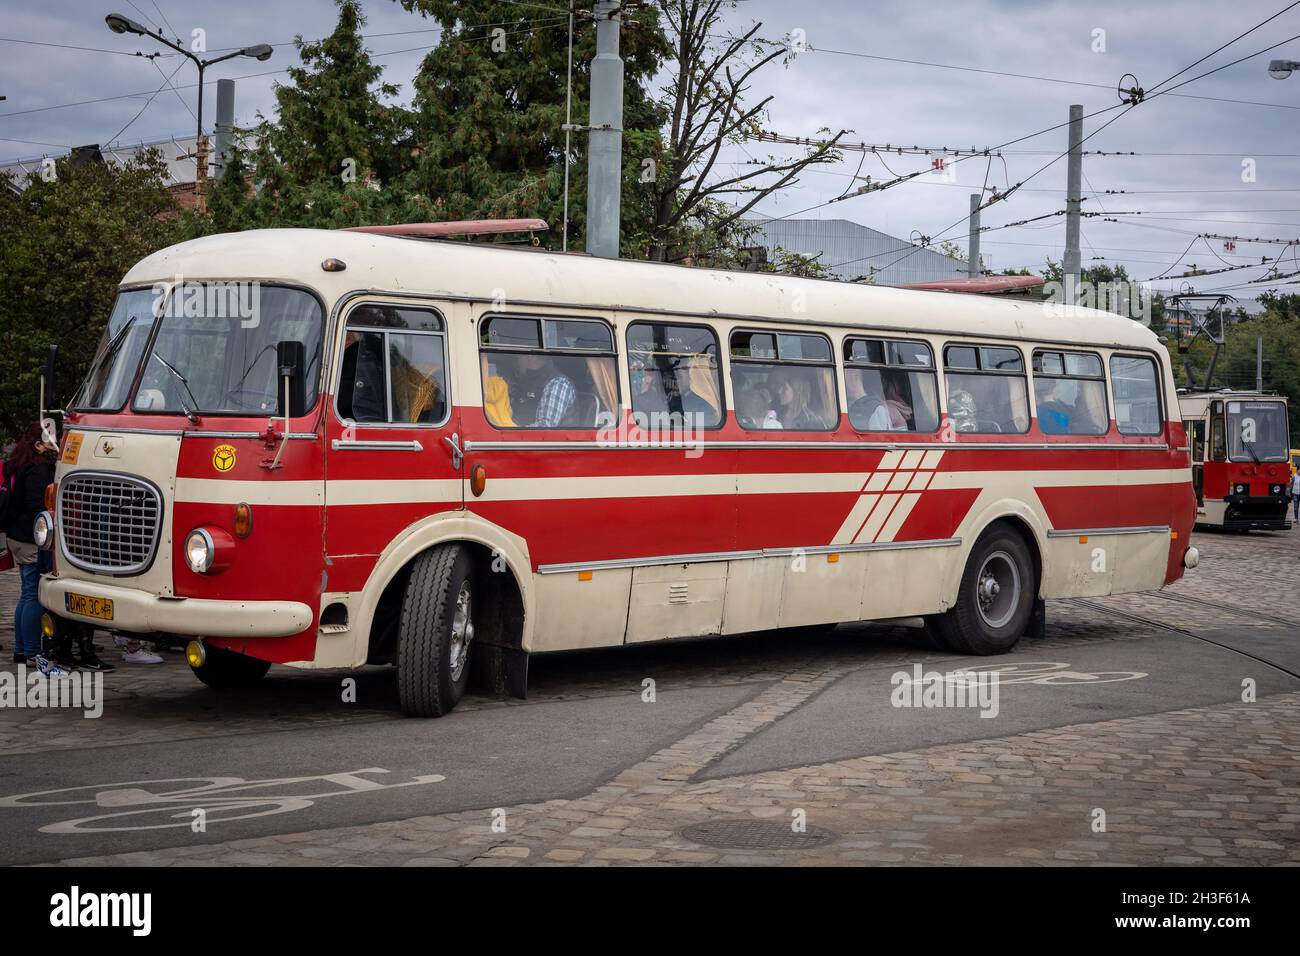 Wroclaw, Poland - September 19, 2021: A vintage red and cream Skoda bus at the bus stop, with passengers sitting inside. Stock Photo